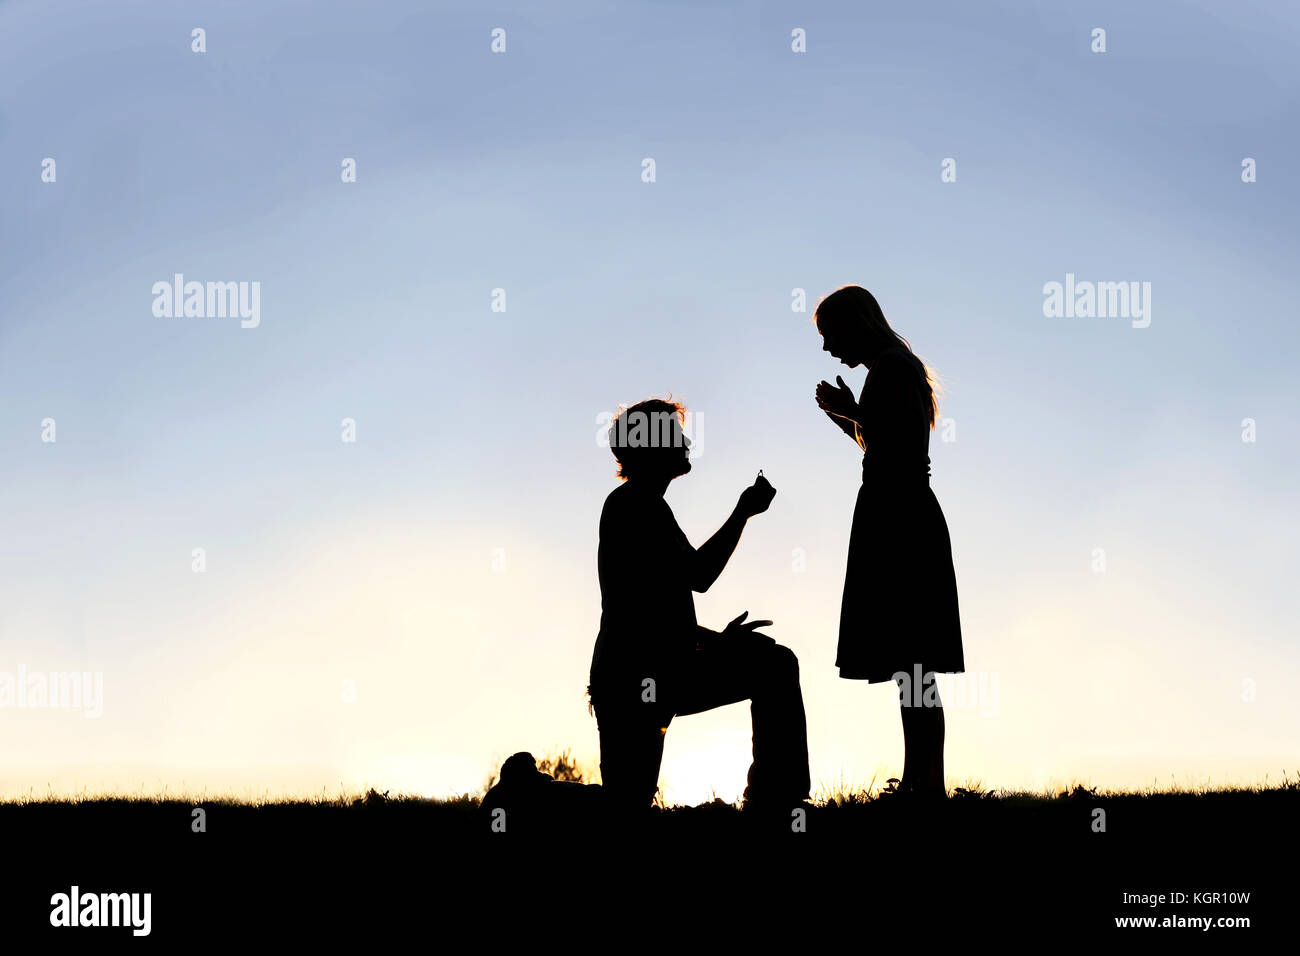 A silhouette of a young man, down on one knee and holding a diamond engagement ring, proposing to his girlfriend. Stock Photo